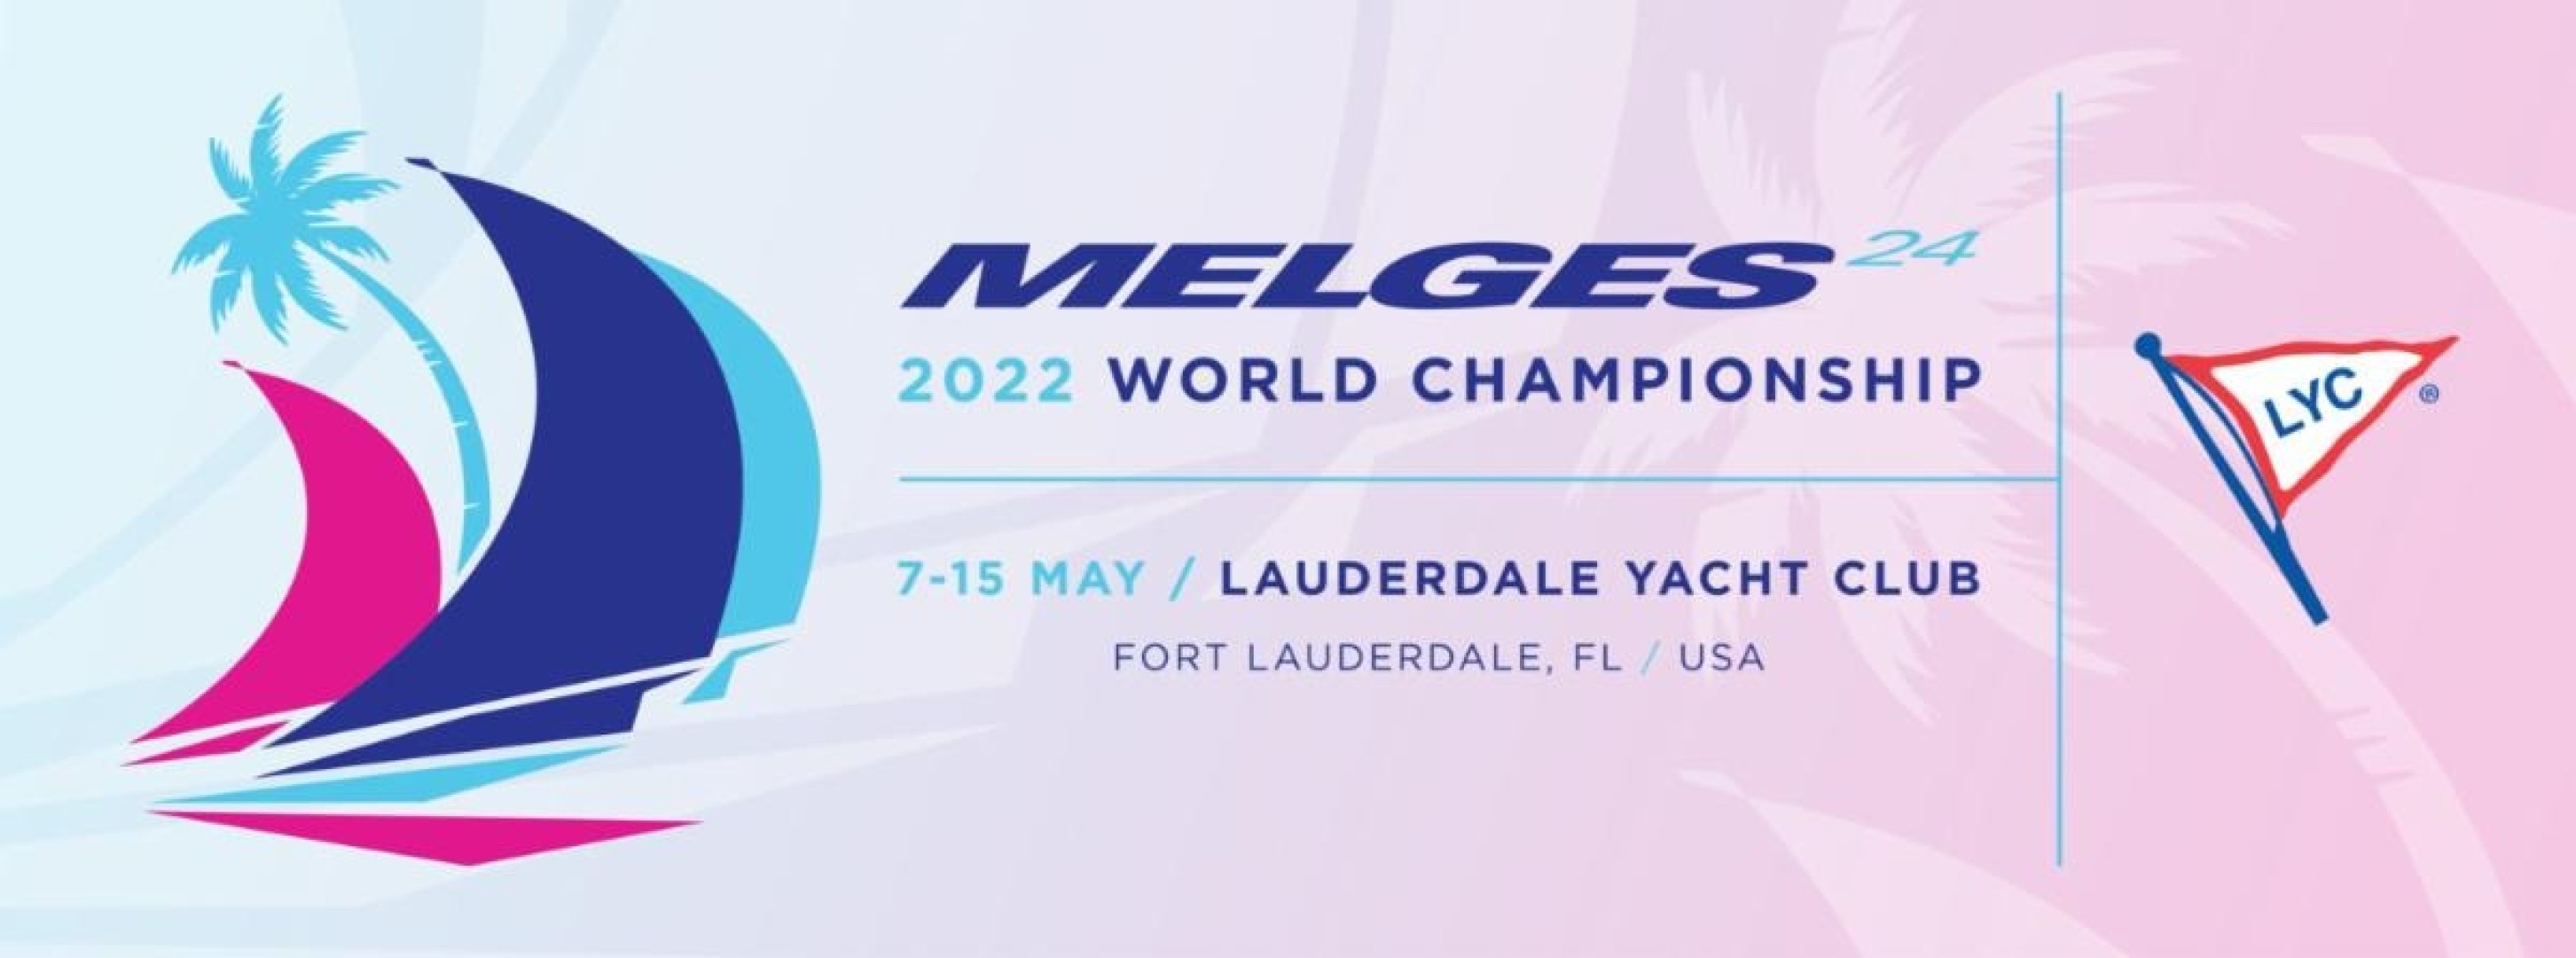 The 2022 Melges 24 Worlds will be held on May 7-15, 2022 in Fort Lauderdale, hosted by the Lauderdale Yacht Club